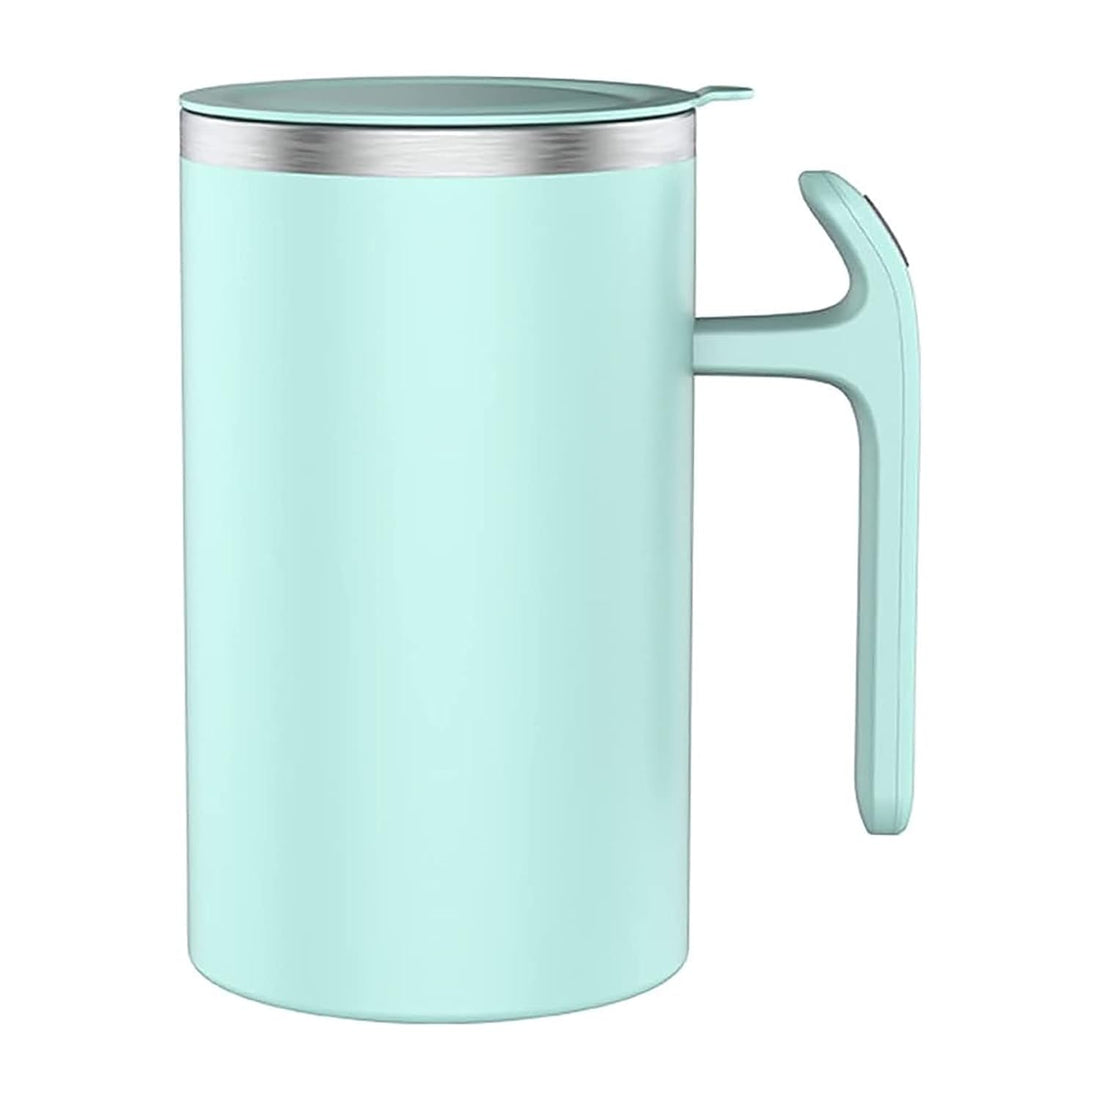 Automatic Stirring Coffee Mug, Self Mixing Stainless Steel Cup for Milk Beverage Chocolate (Light green)